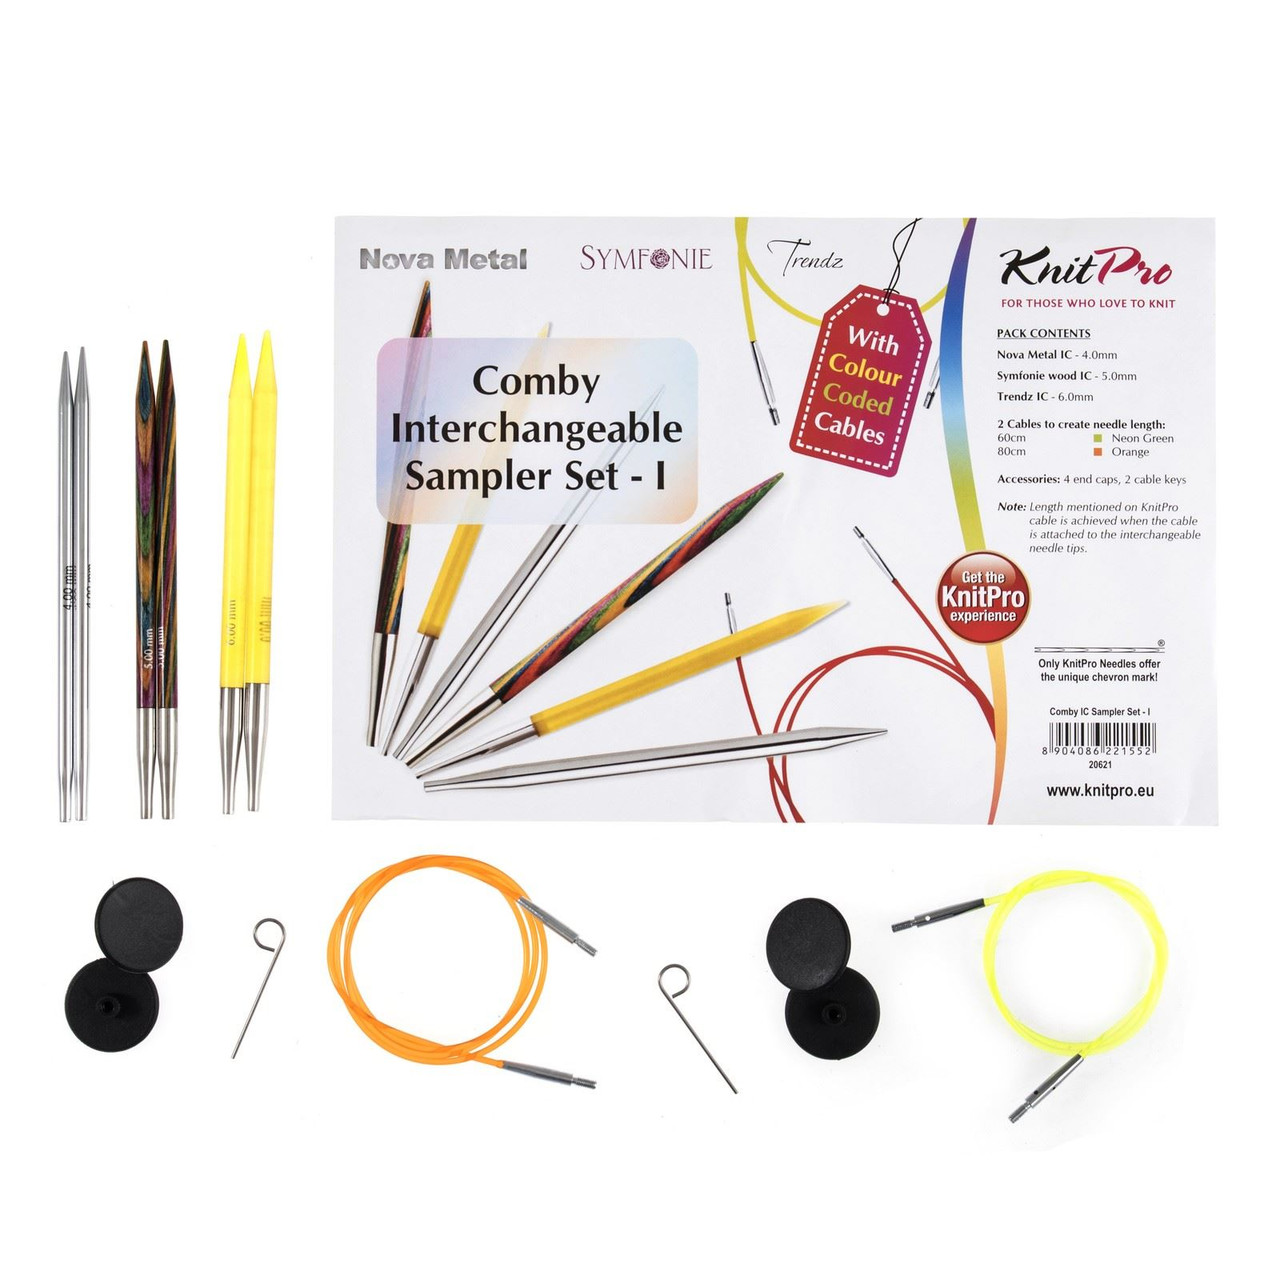 Tried & Tested: KnitPro Zings Interchangeable Circular Needles Review